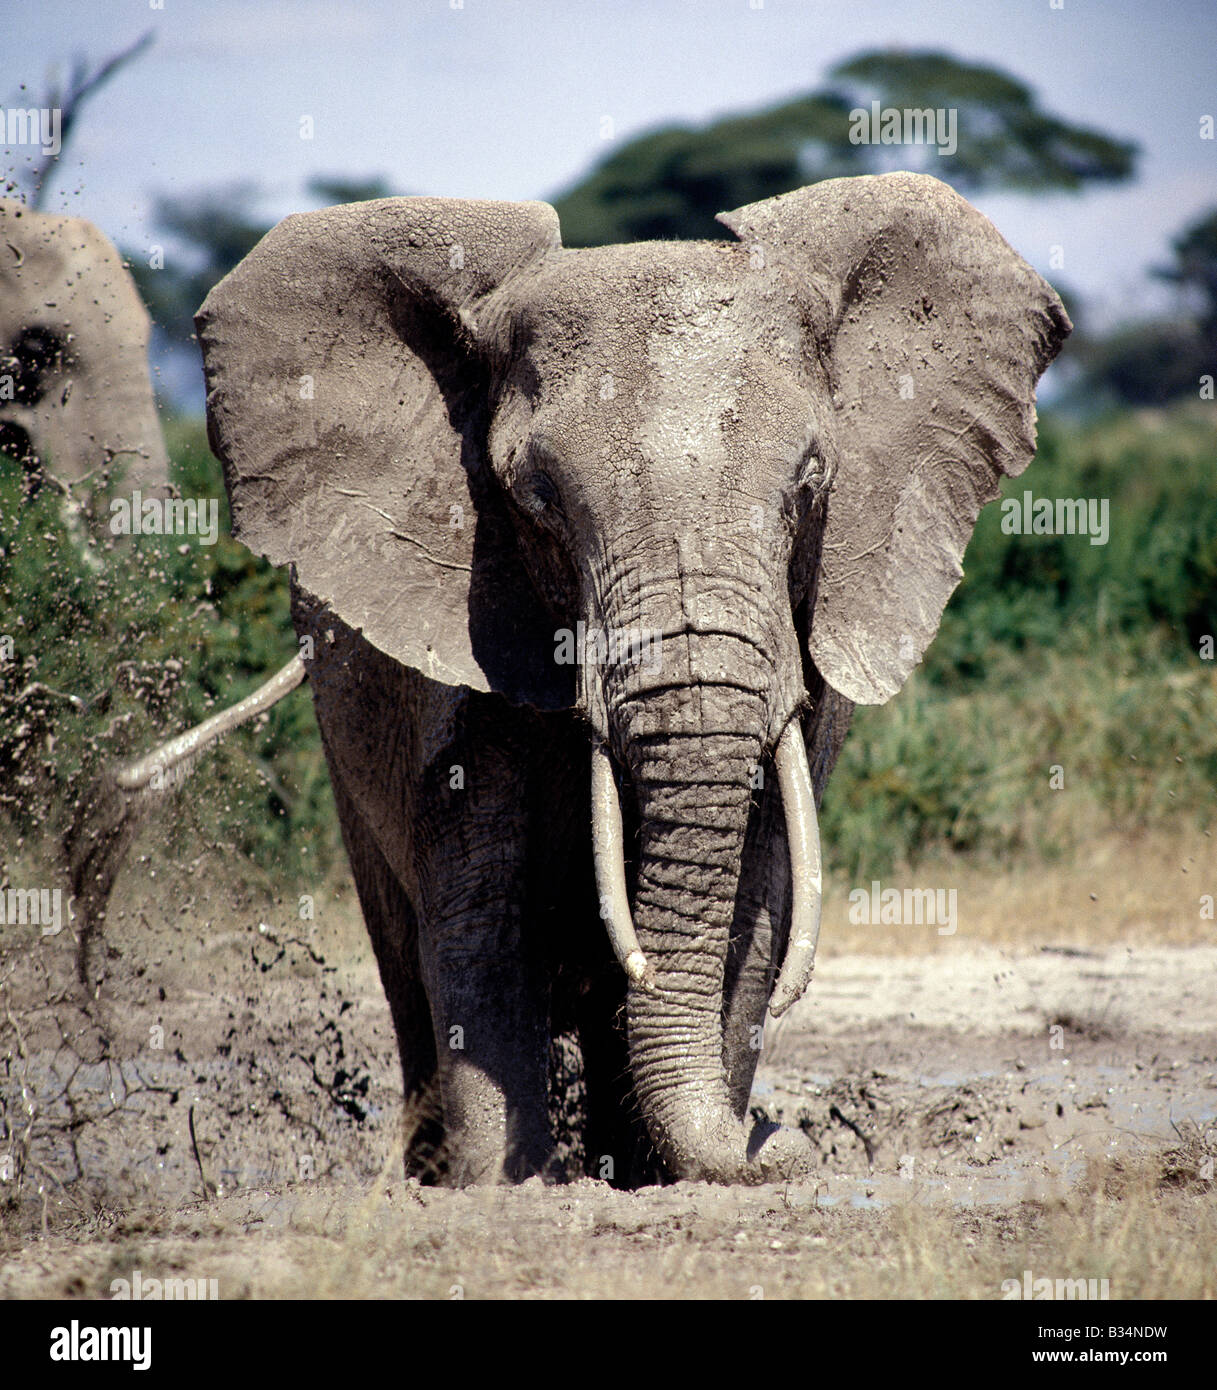 Kenya, Aberdare National Park, The Ark. An elephant takes a mud bath in the Amboseli National Park. Stock Photo